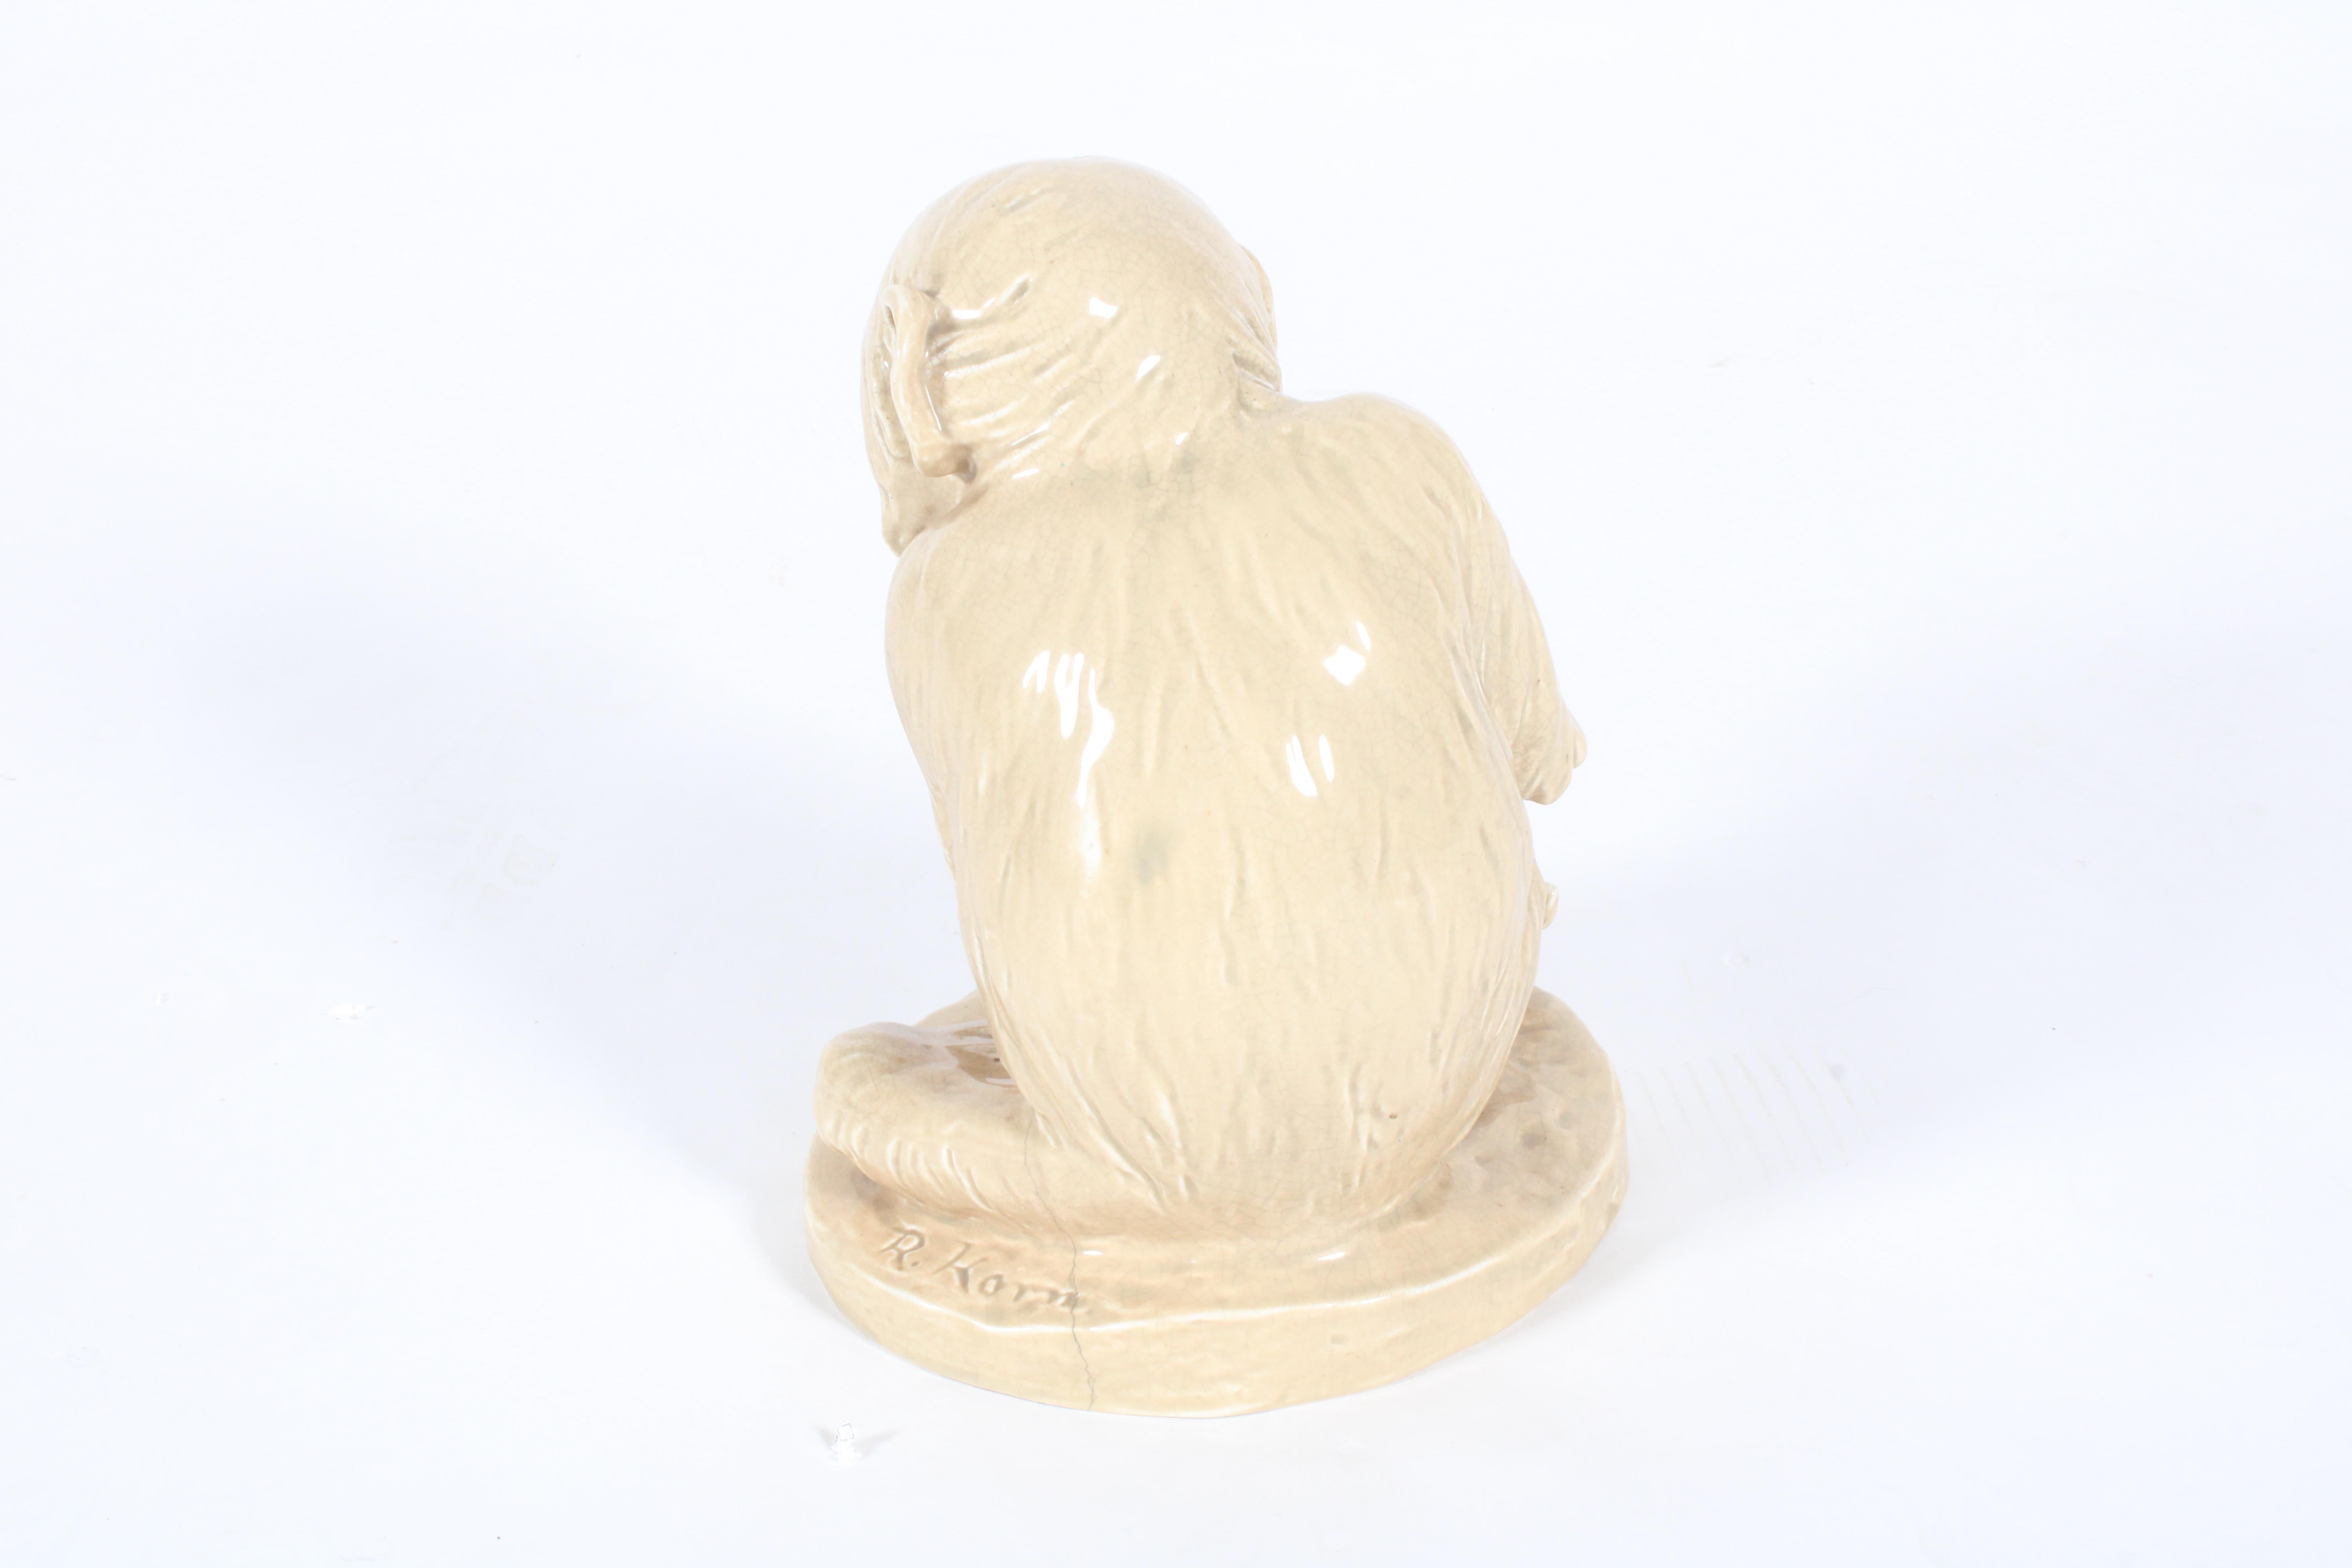 Charming Vintage Ceramic In The Form Of A Chimpanzee  *Free Worldwide Shipping 13